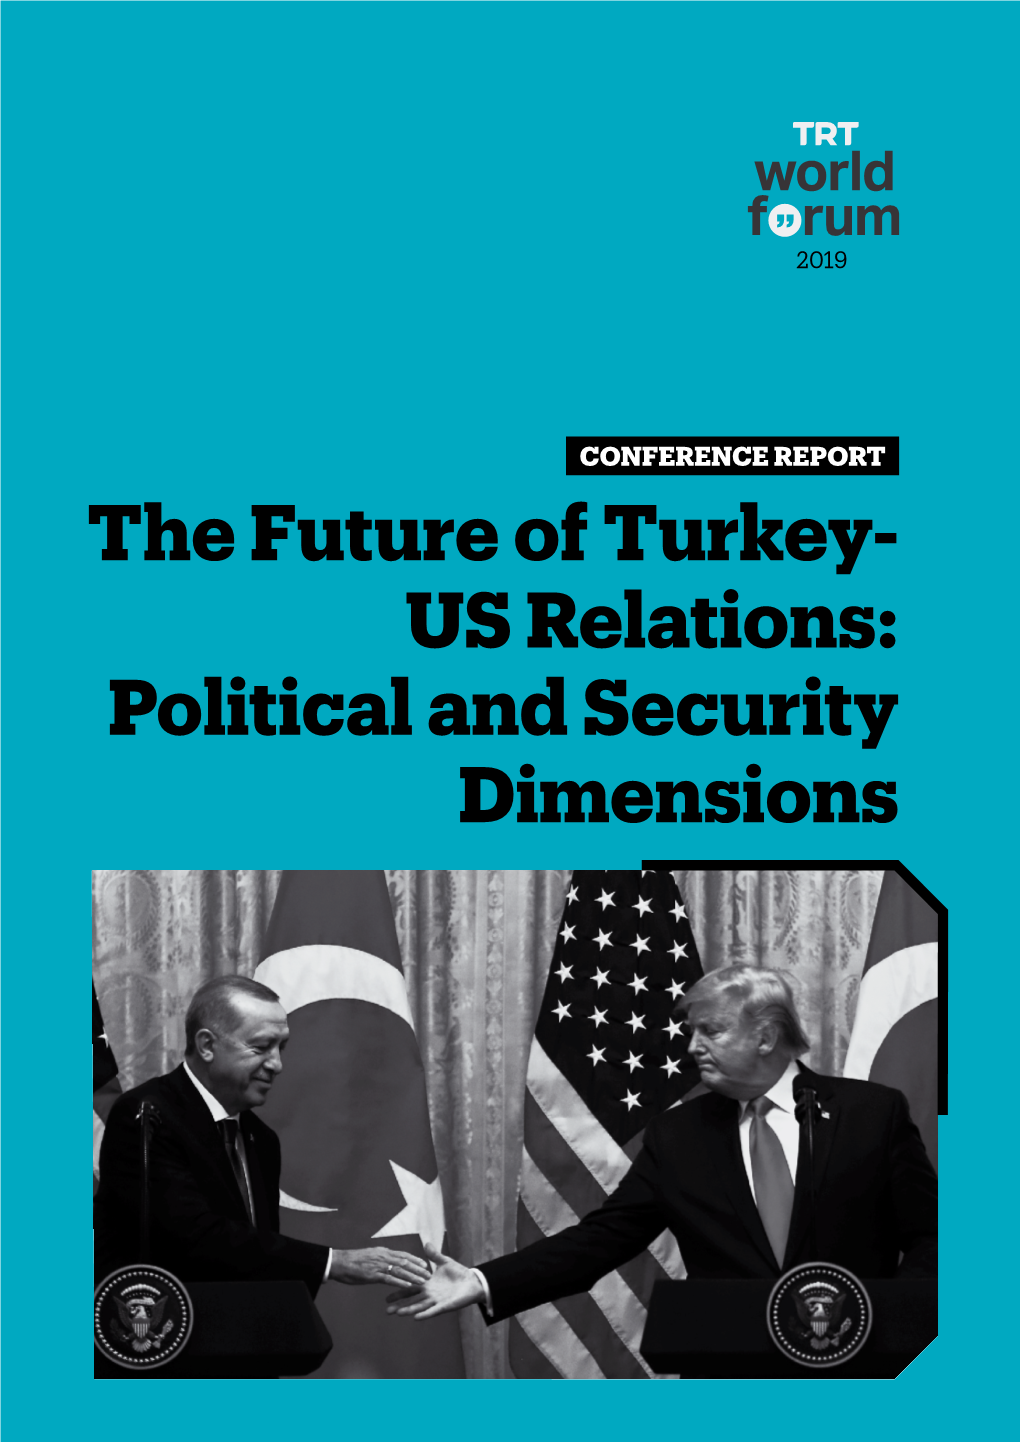 The Future of Turkey- US Relations: Political and Security Dimensions